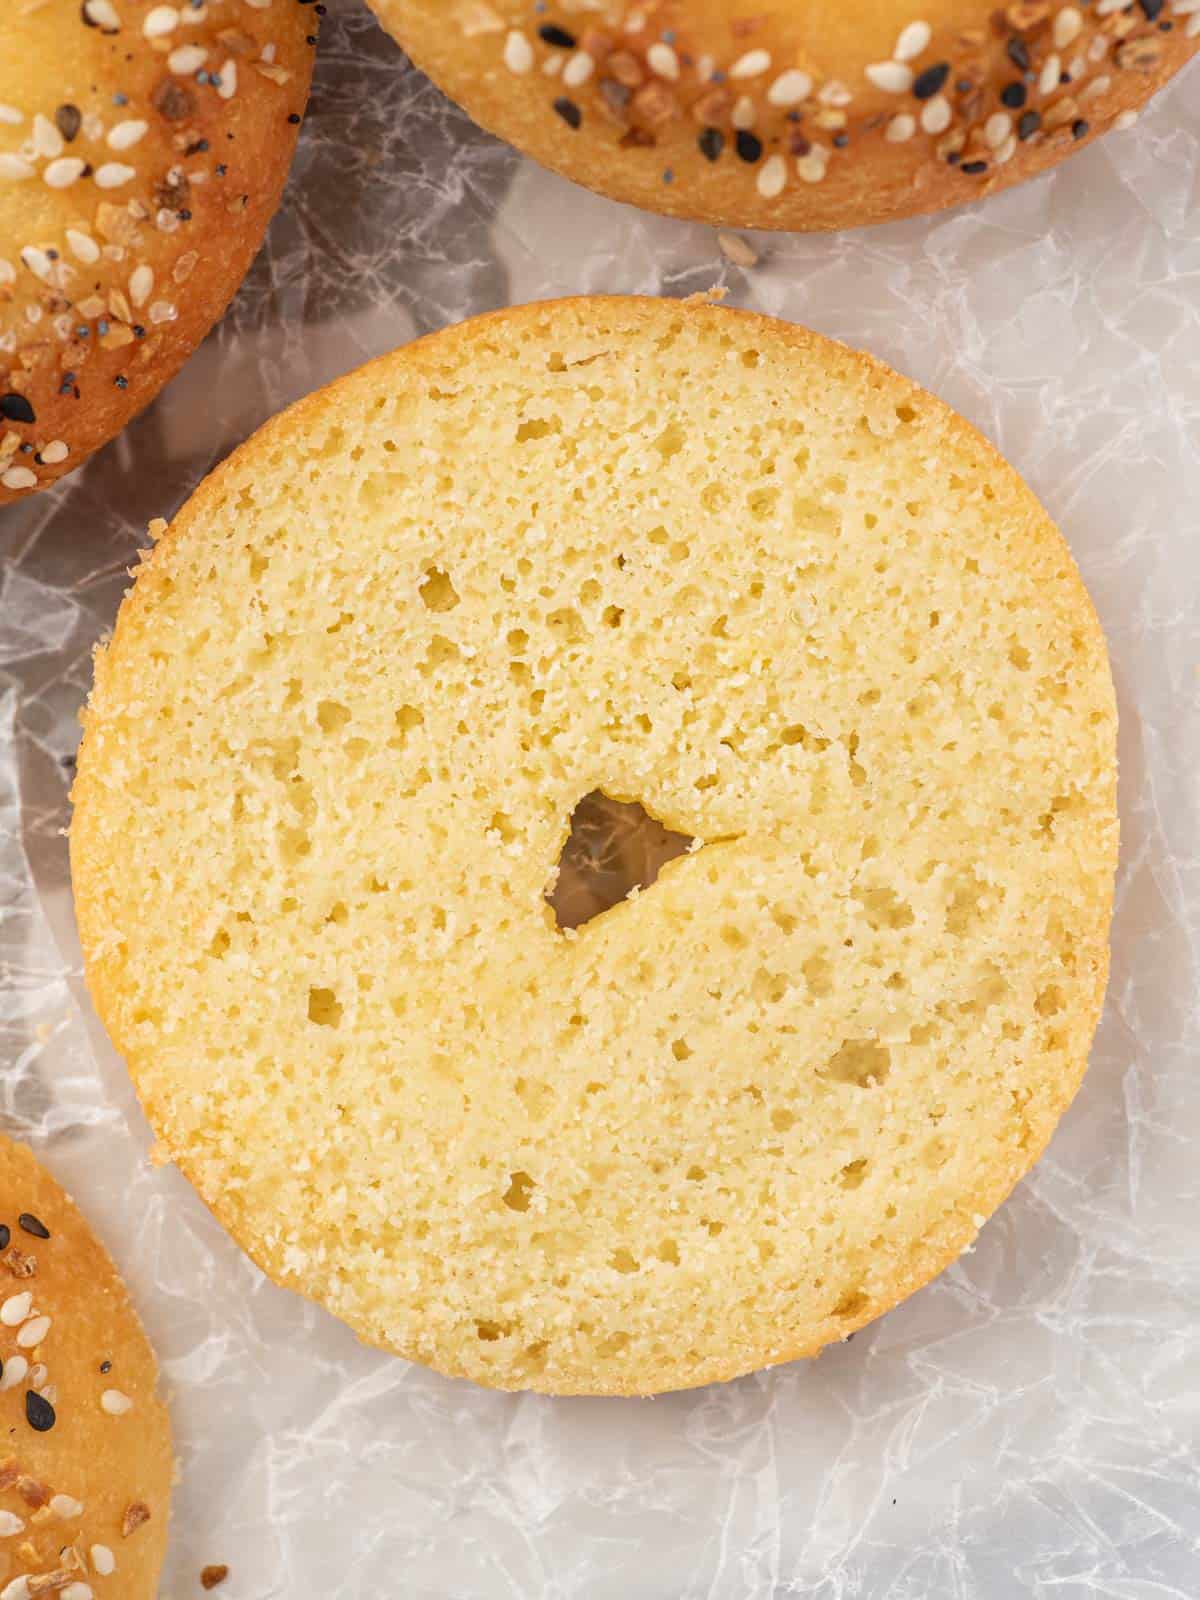 Closeup of low carb everything bagel sliced in half.